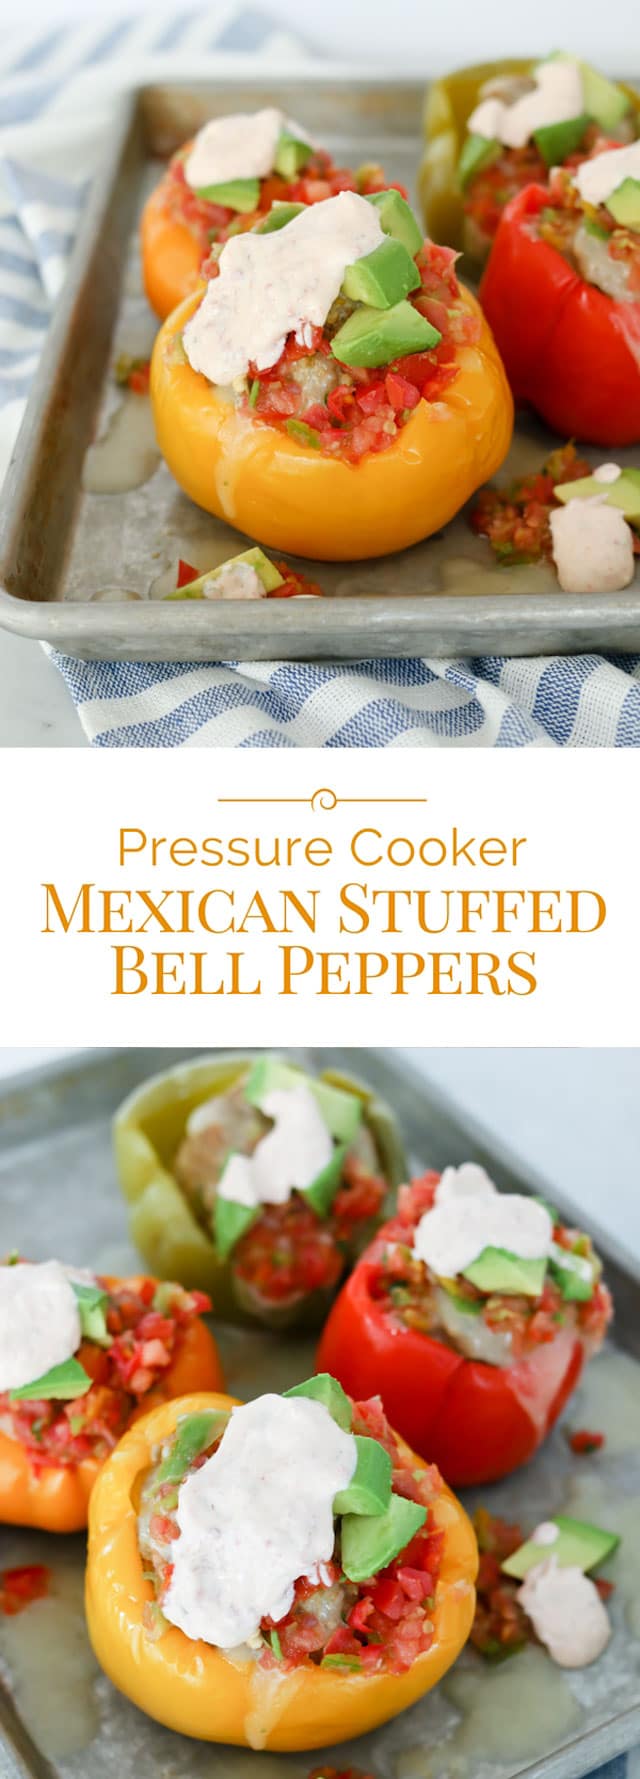 Mexican stuffed bell peppers made in a pressure cooker come out perfectly tender every time. This is the best stuffed peppers recipe, because there's no precooking required! Instant Pot recipe for Mexican Stuffed Bell Peppers with Chipotle Lime Sauce! #pressurecooking #instantpot #Mexicanrecipes #stuffedpeppers via @PressureCook2da